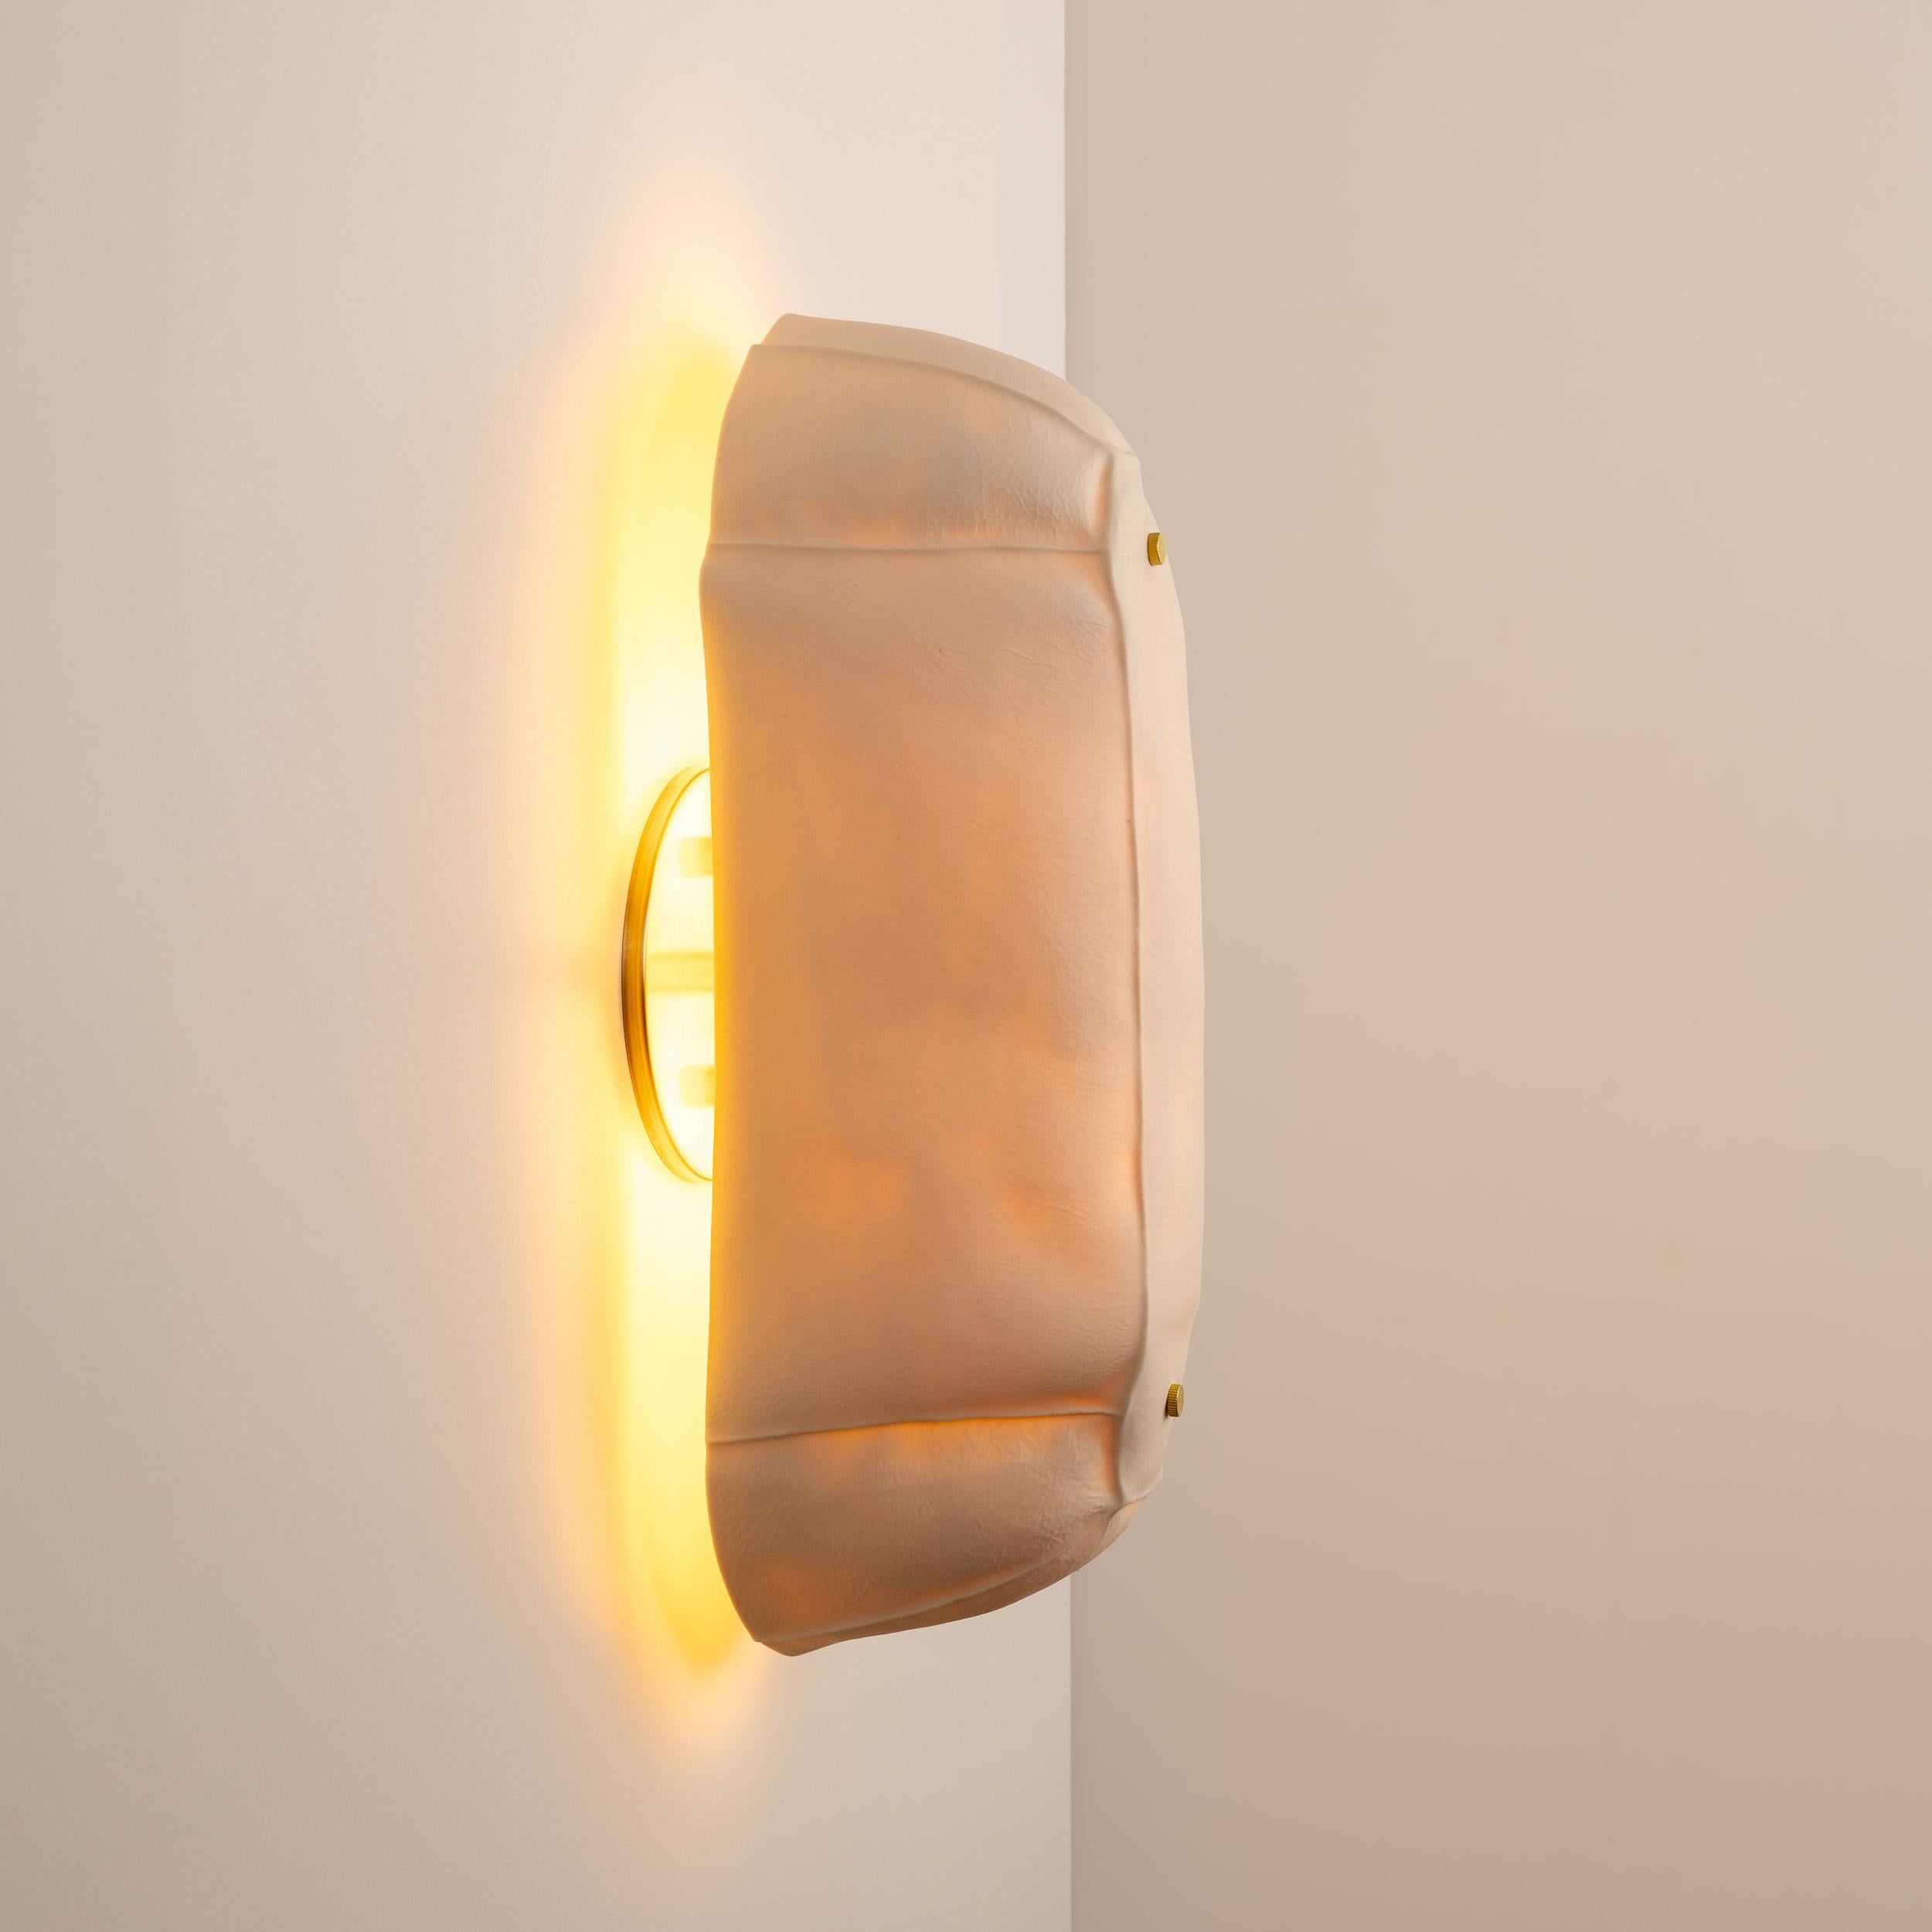 Contemporary Pair of Kawa Wall Sconce 01, Porcelain, Brass, Ceramic Wall Light, Organic For Sale